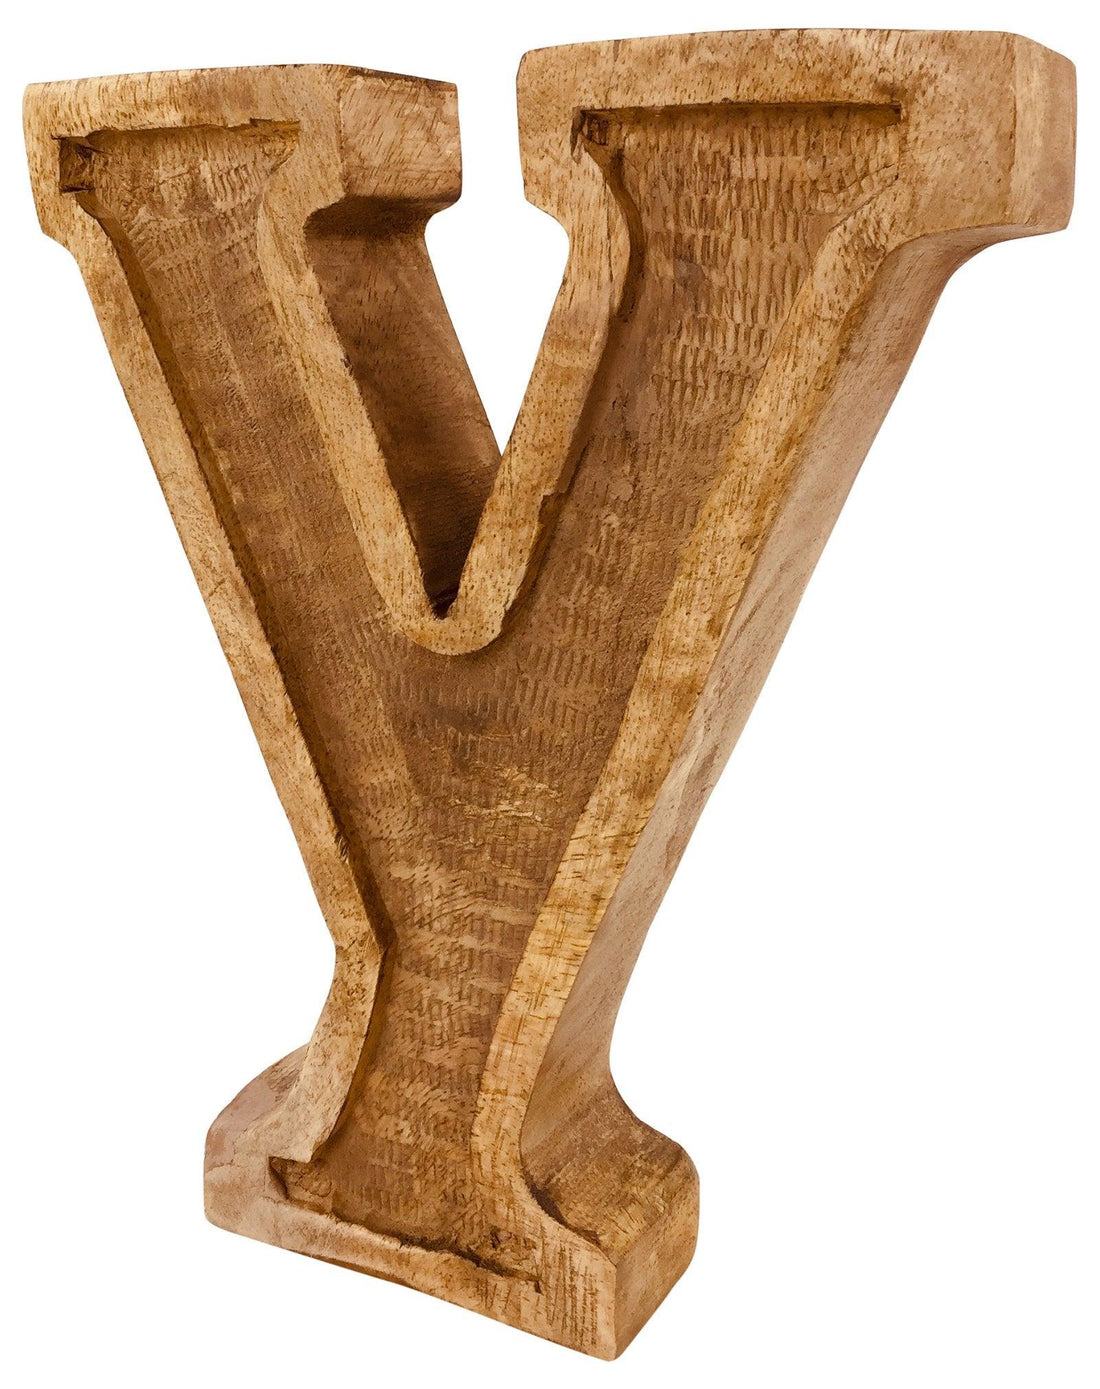 Hand Carved Wooden Embossed Letter Y - £18.99 - Single Letters 